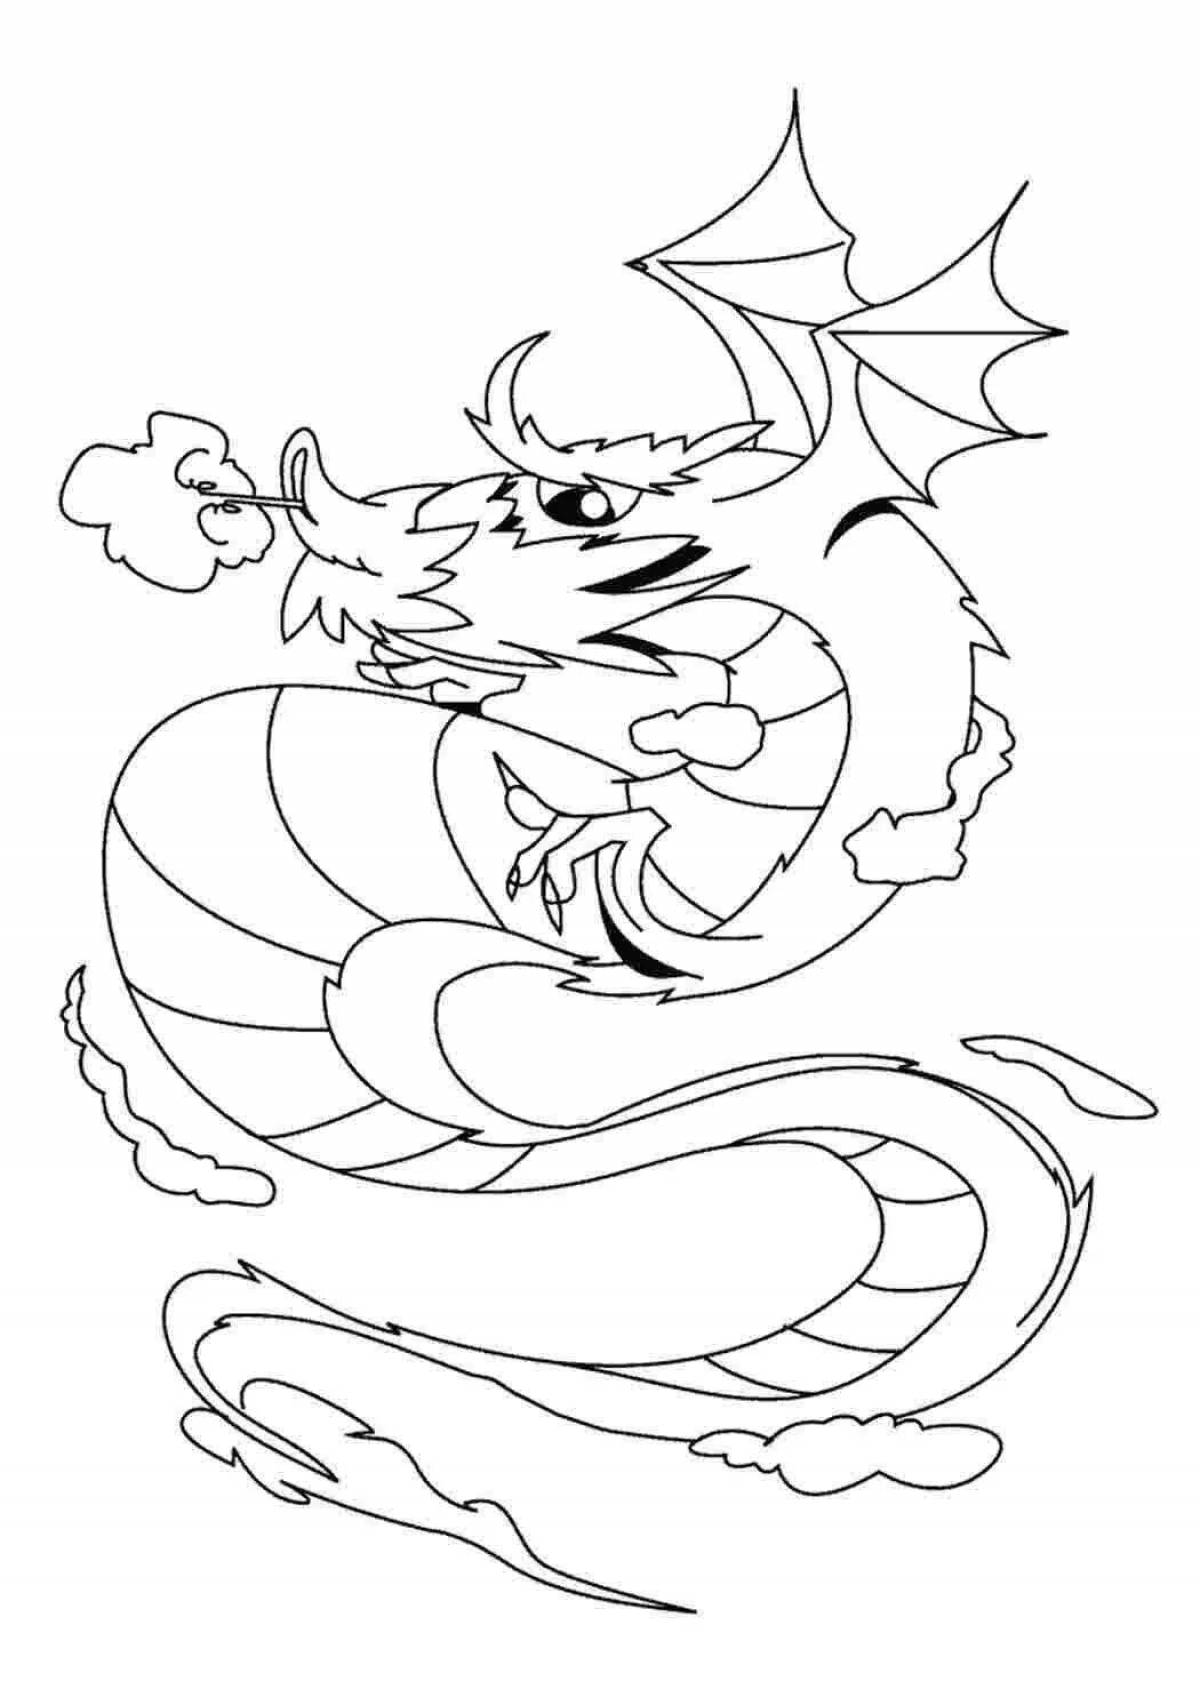 Luxury Chinese dragon coloring book for kids